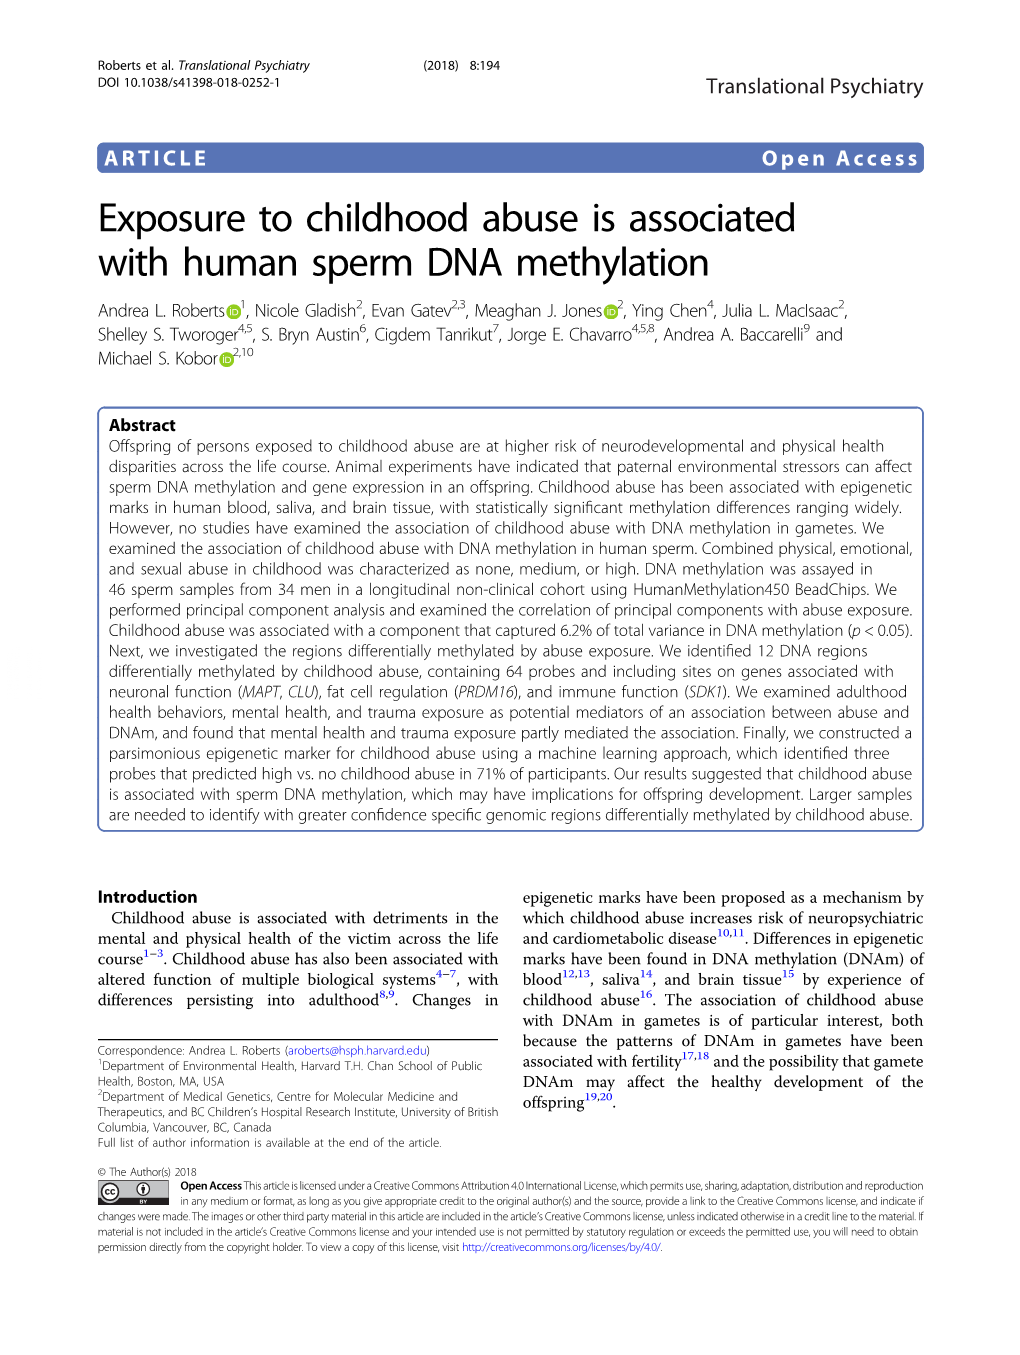 Exposure to Childhood Abuse Is Associated with Human Sperm DNA Methylation Andrea L